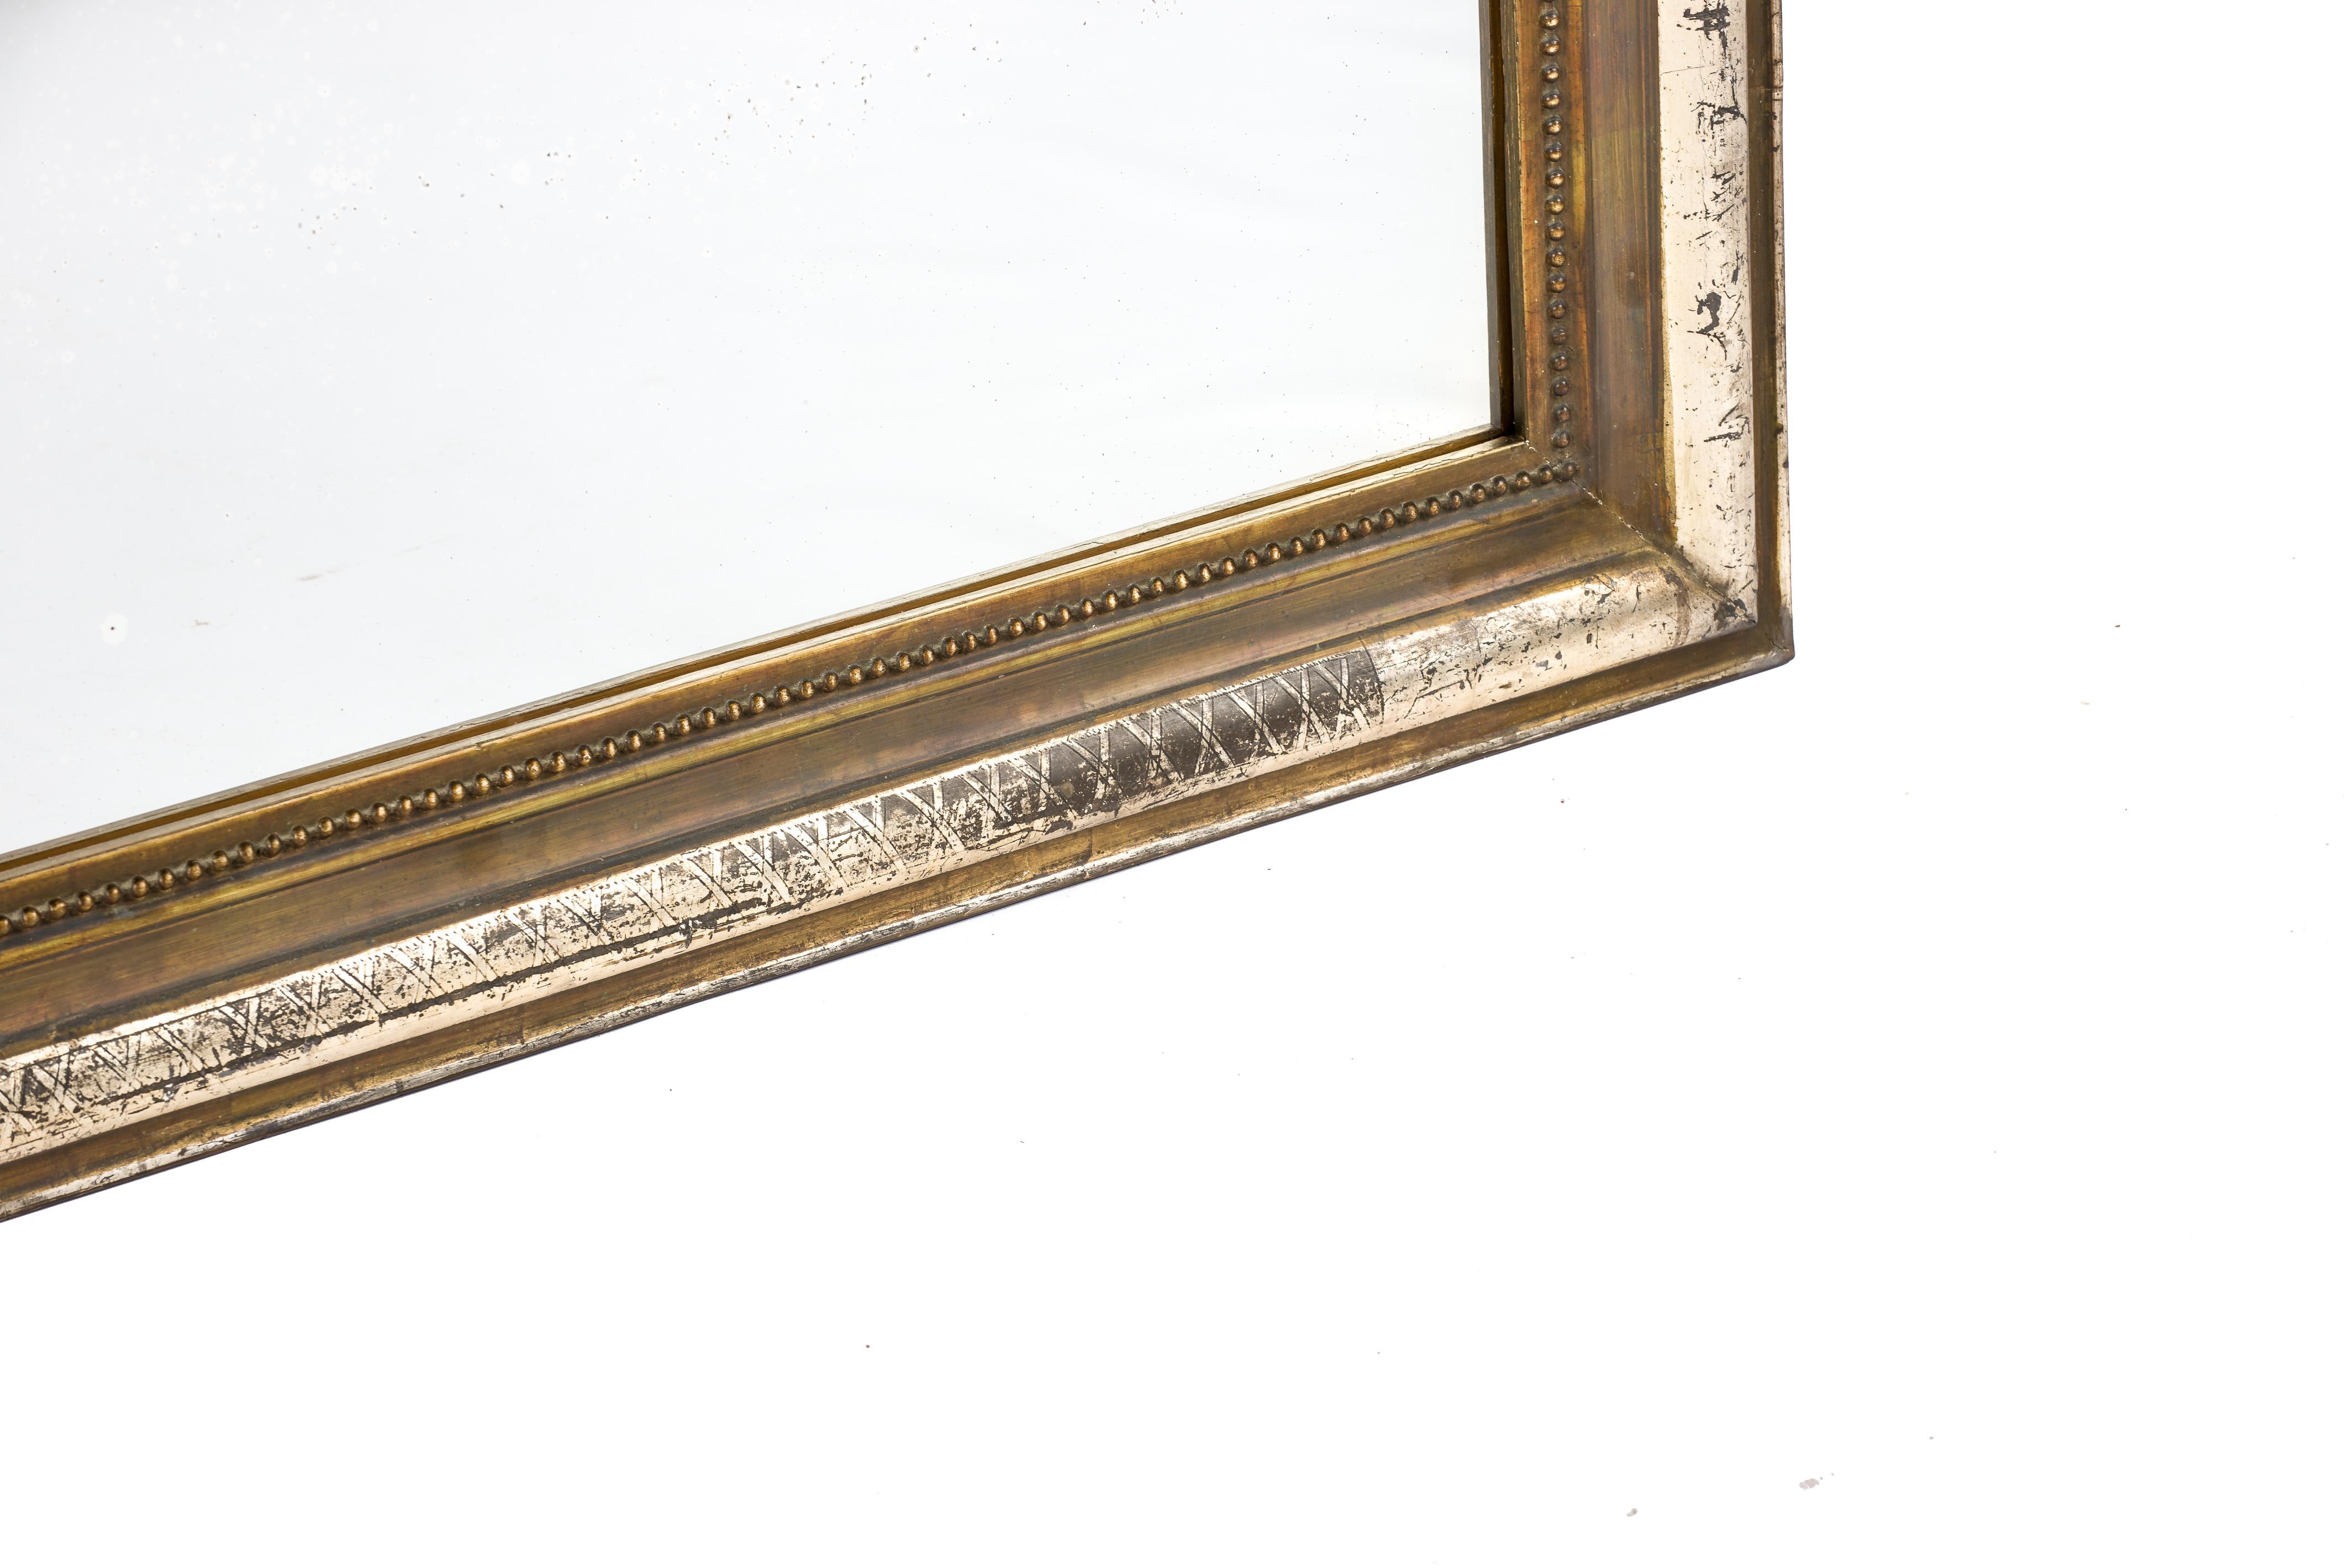 A beautiful and rare antique mirror that was made in northern France in the 1880s. The mirror frame has upper rounded corners typical for the Louis Philippe style. The most elevated part of the frame features a delicate engraved geometric cross